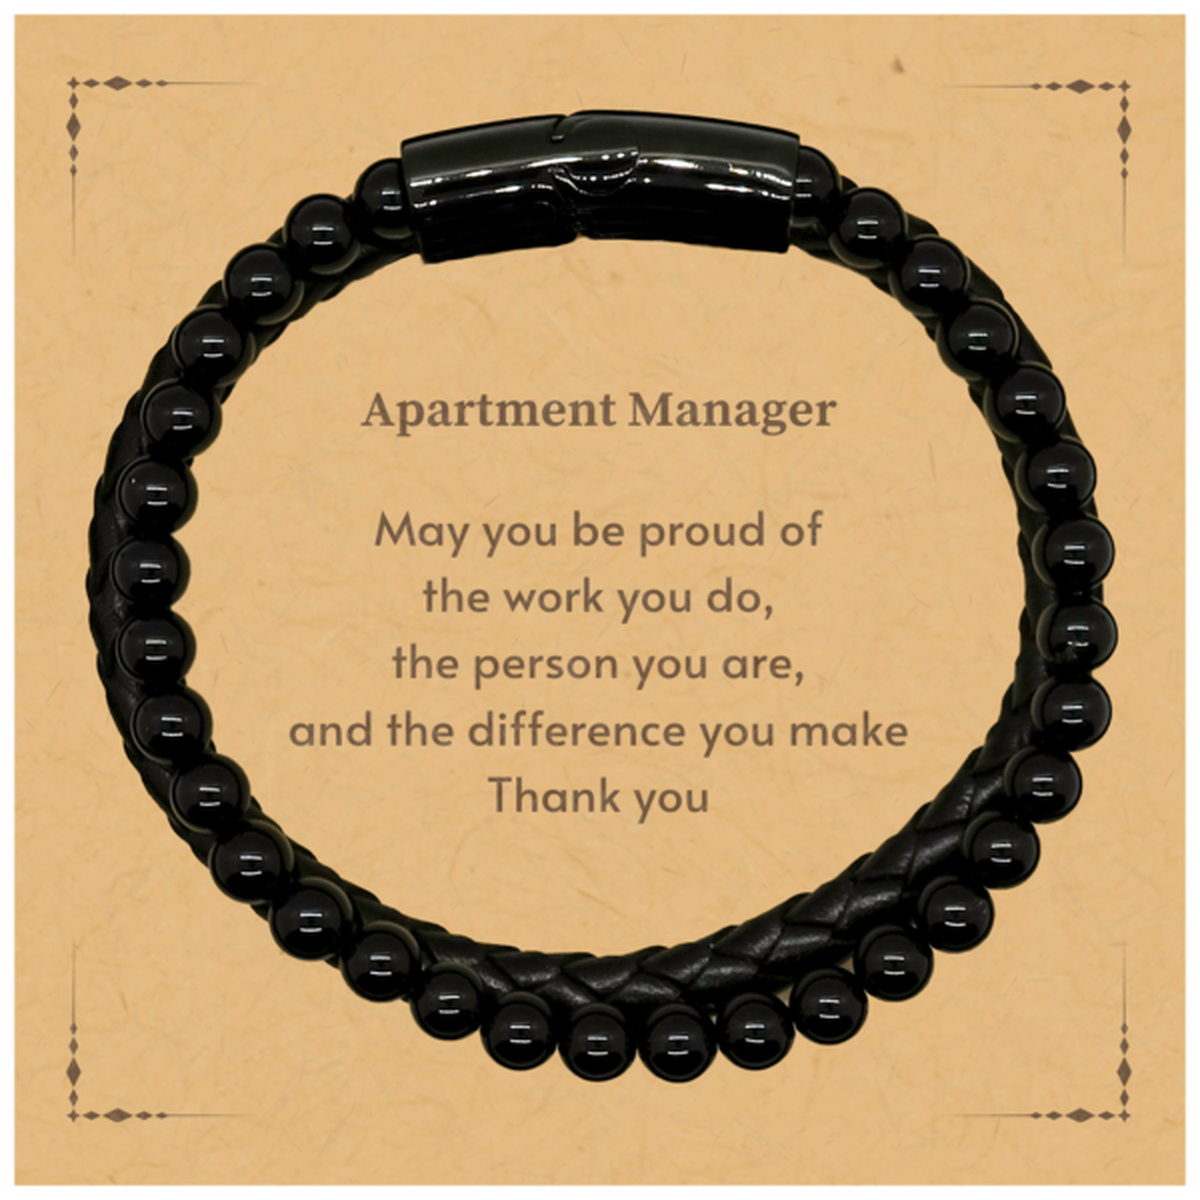 Heartwarming Stone Leather Bracelets Retirement Coworkers Gifts for Apartment Manager, Apartment Manager May You be proud of the work you do, the person you are Gifts for Boss Men Women Friends